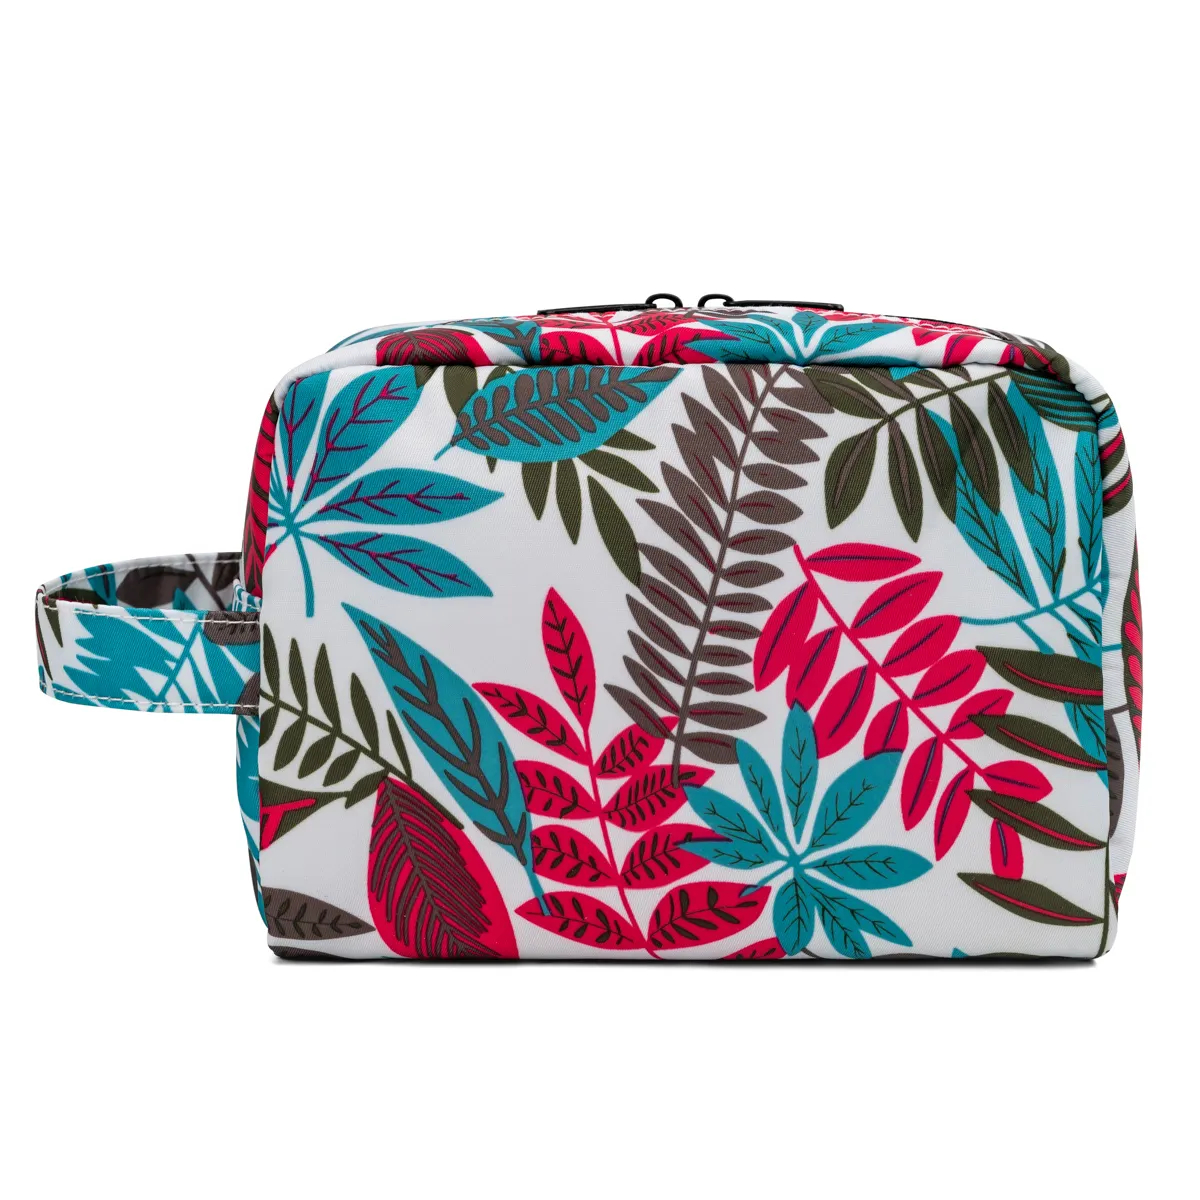 WellPromotion Travel Makeup Bags